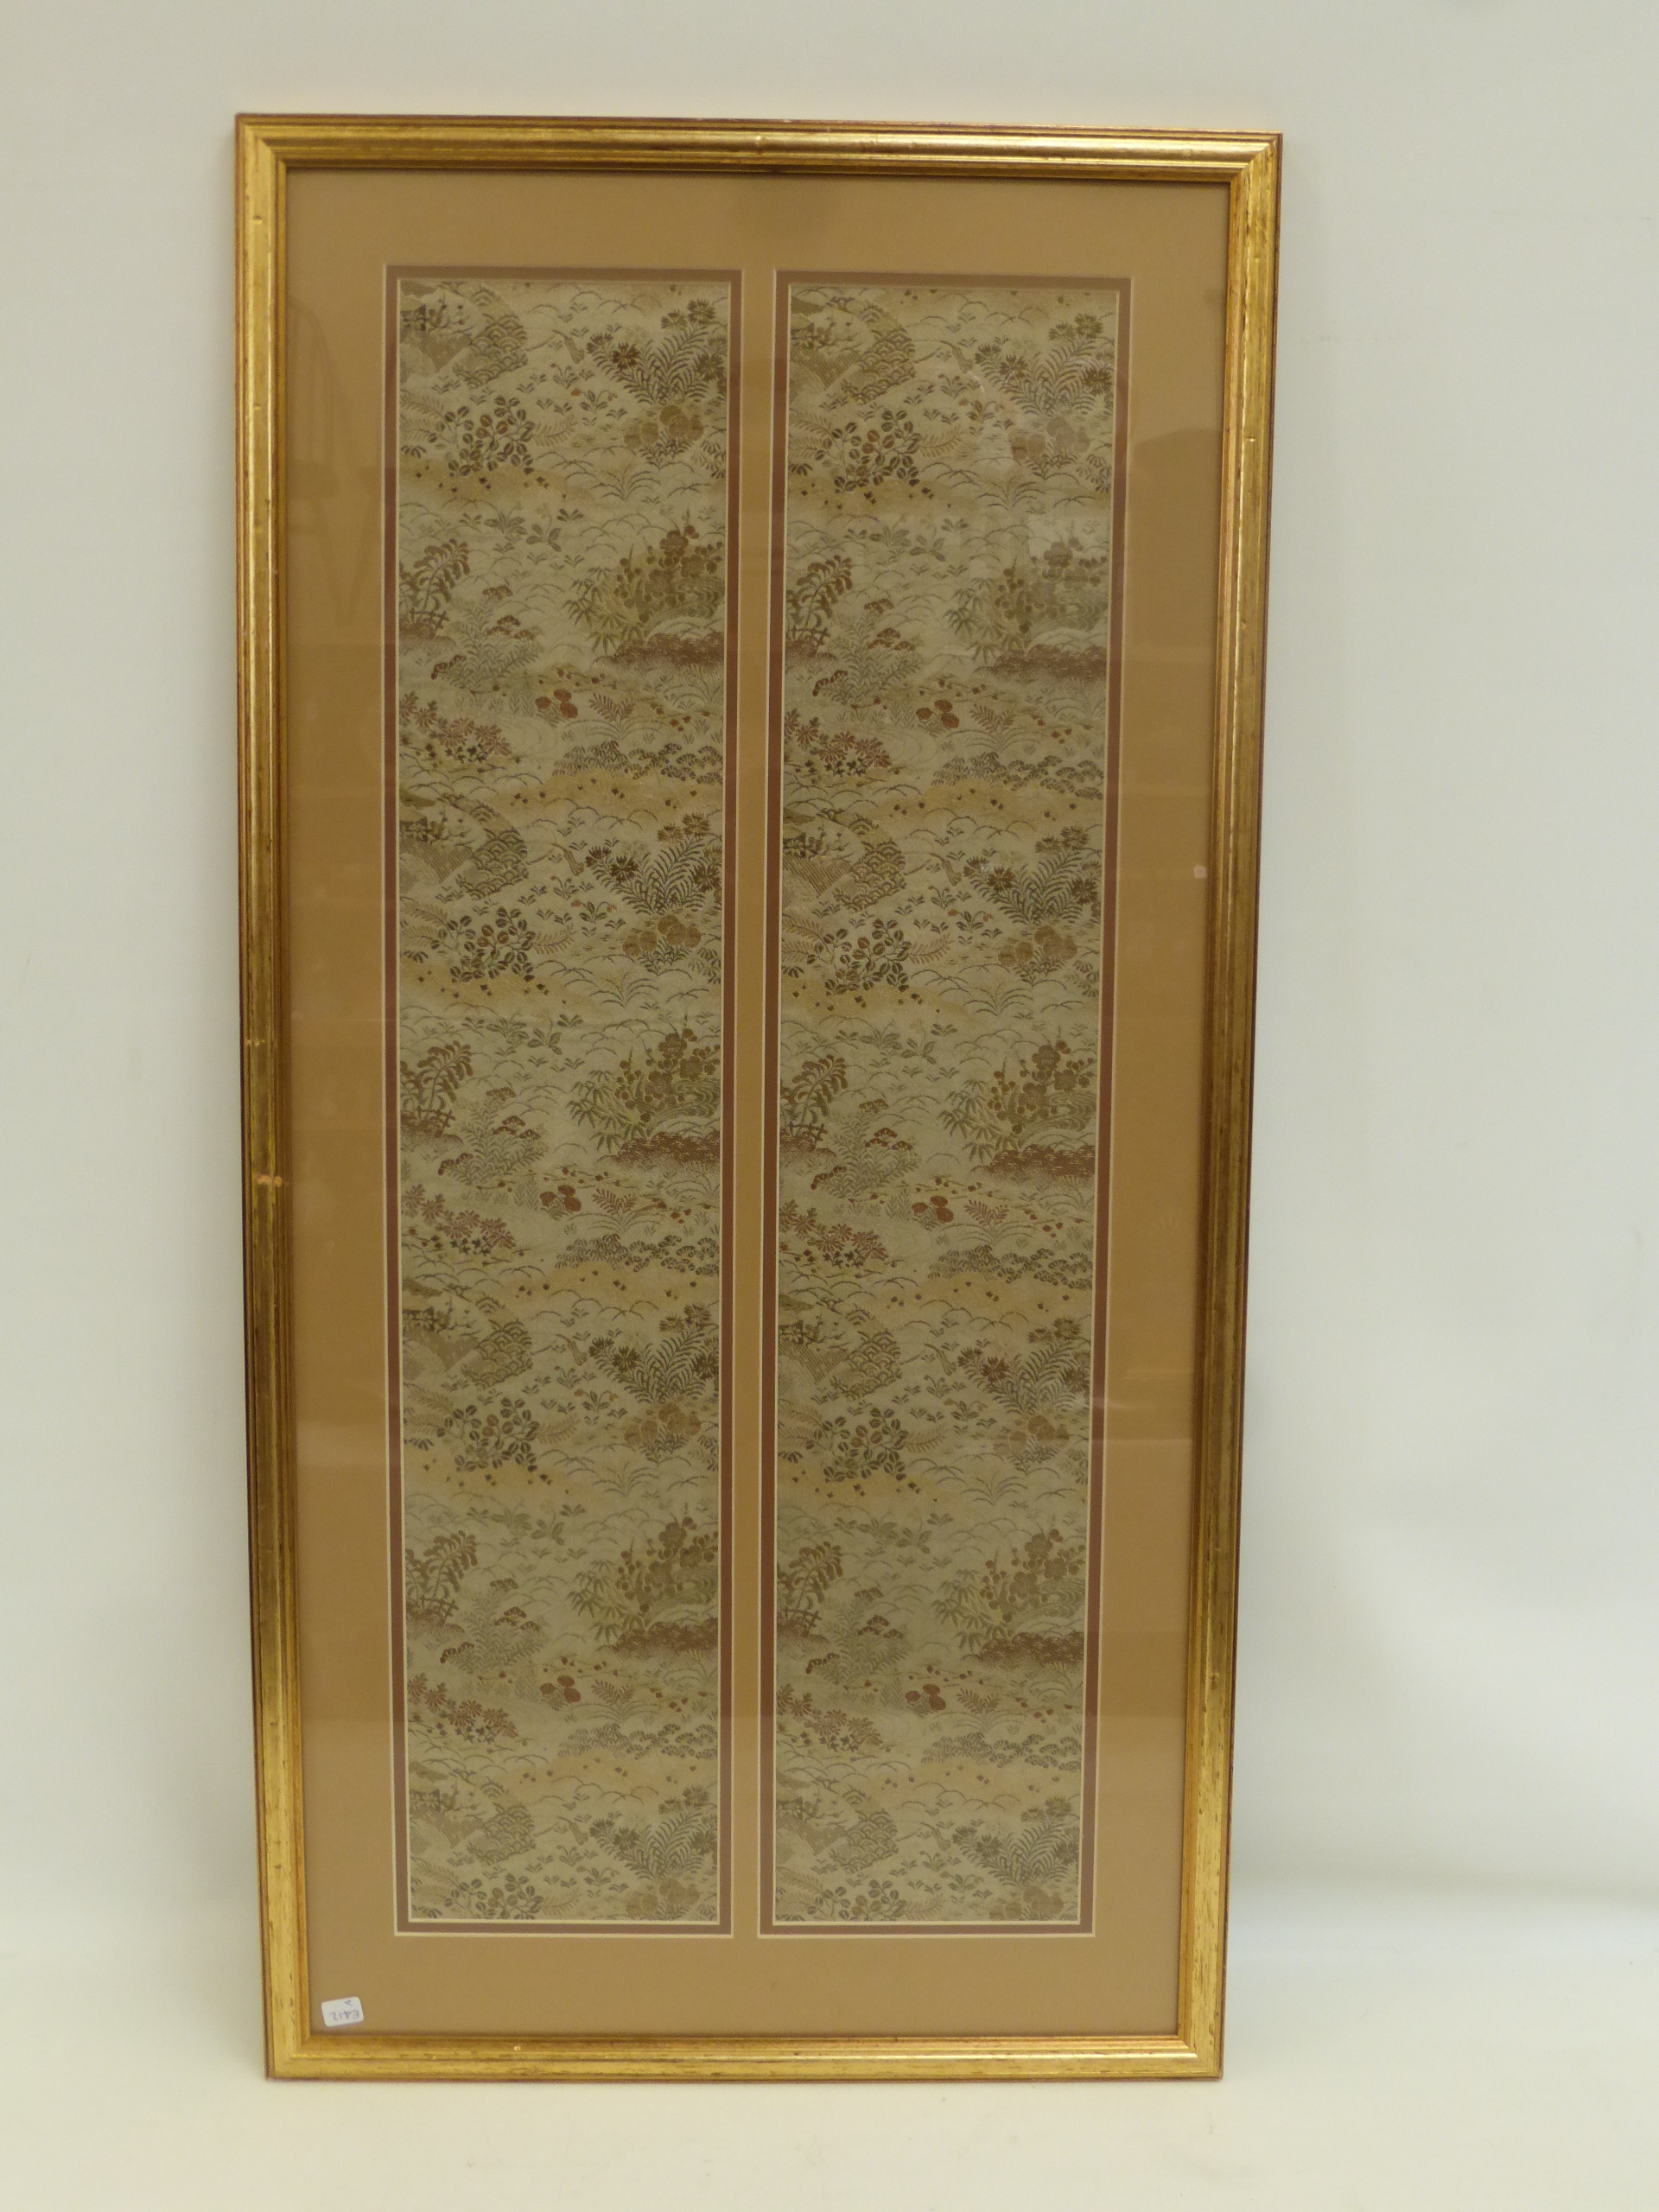 An early 20th Century Japanese sewn diptych of an obi.